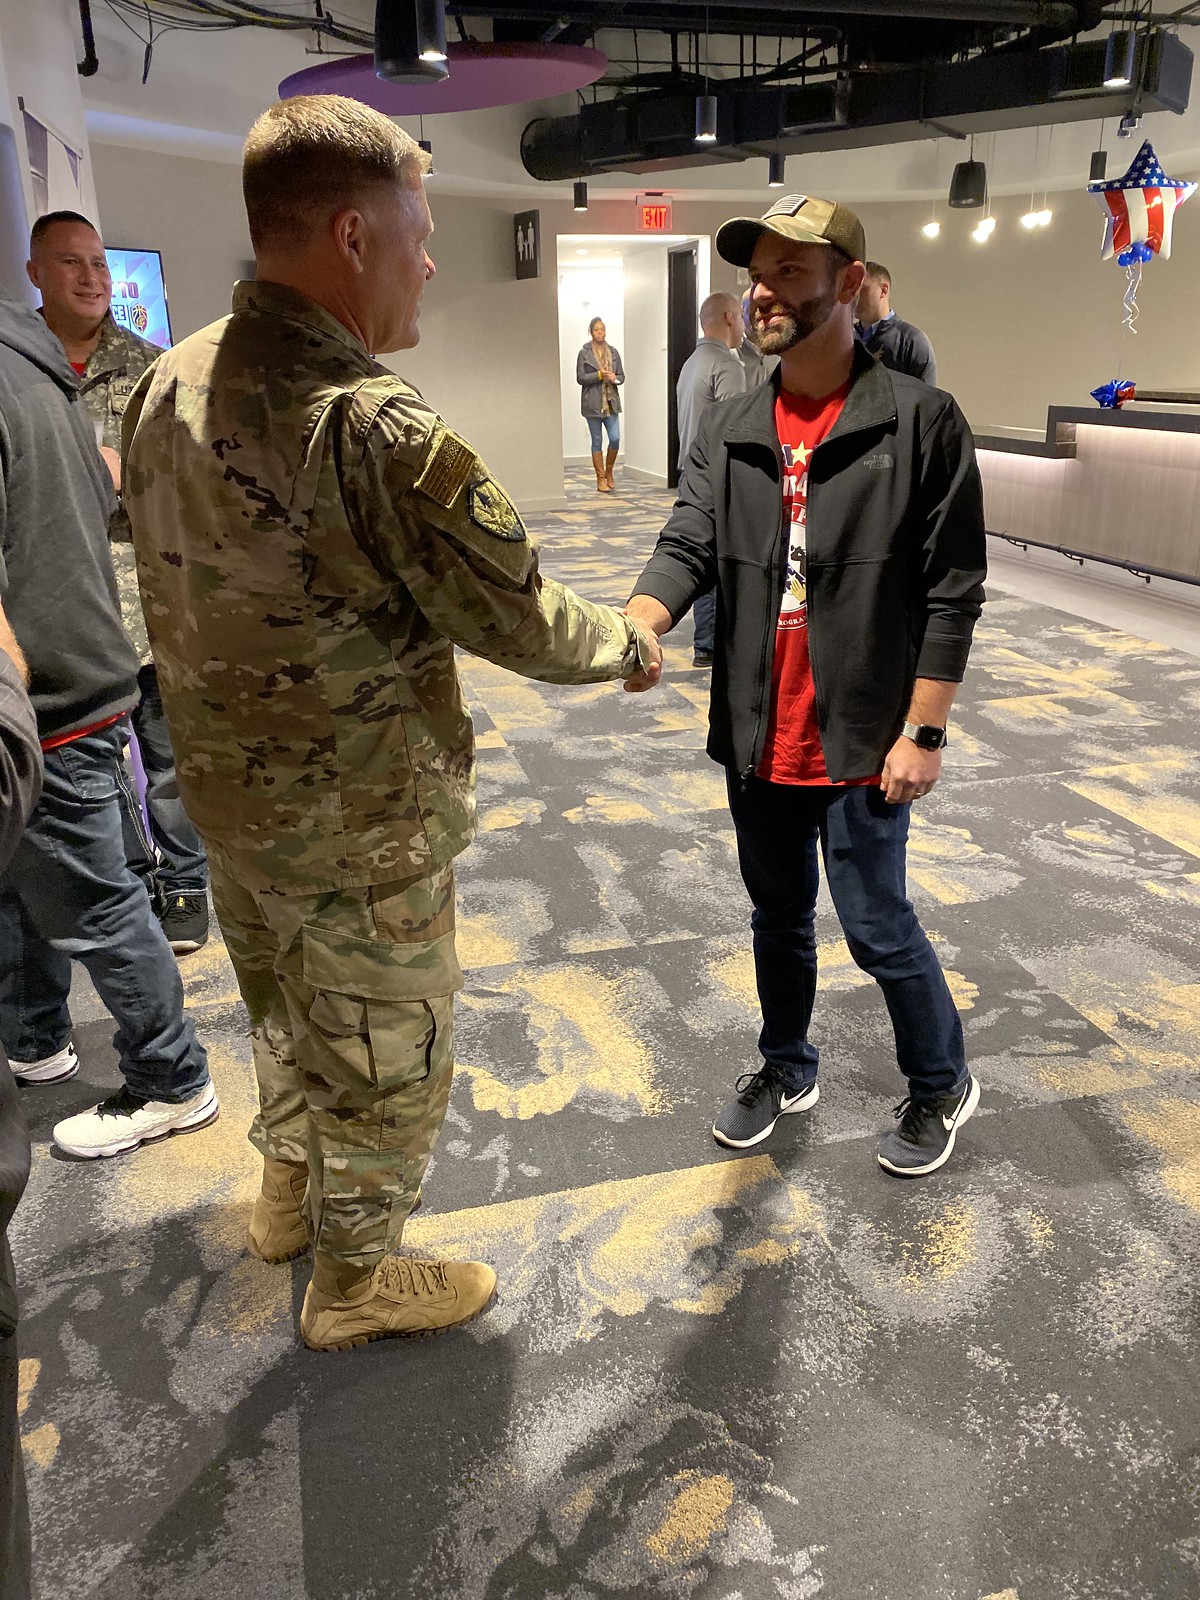 2019_T4T_Cleveland Cavaliers Hoops for Troops 9